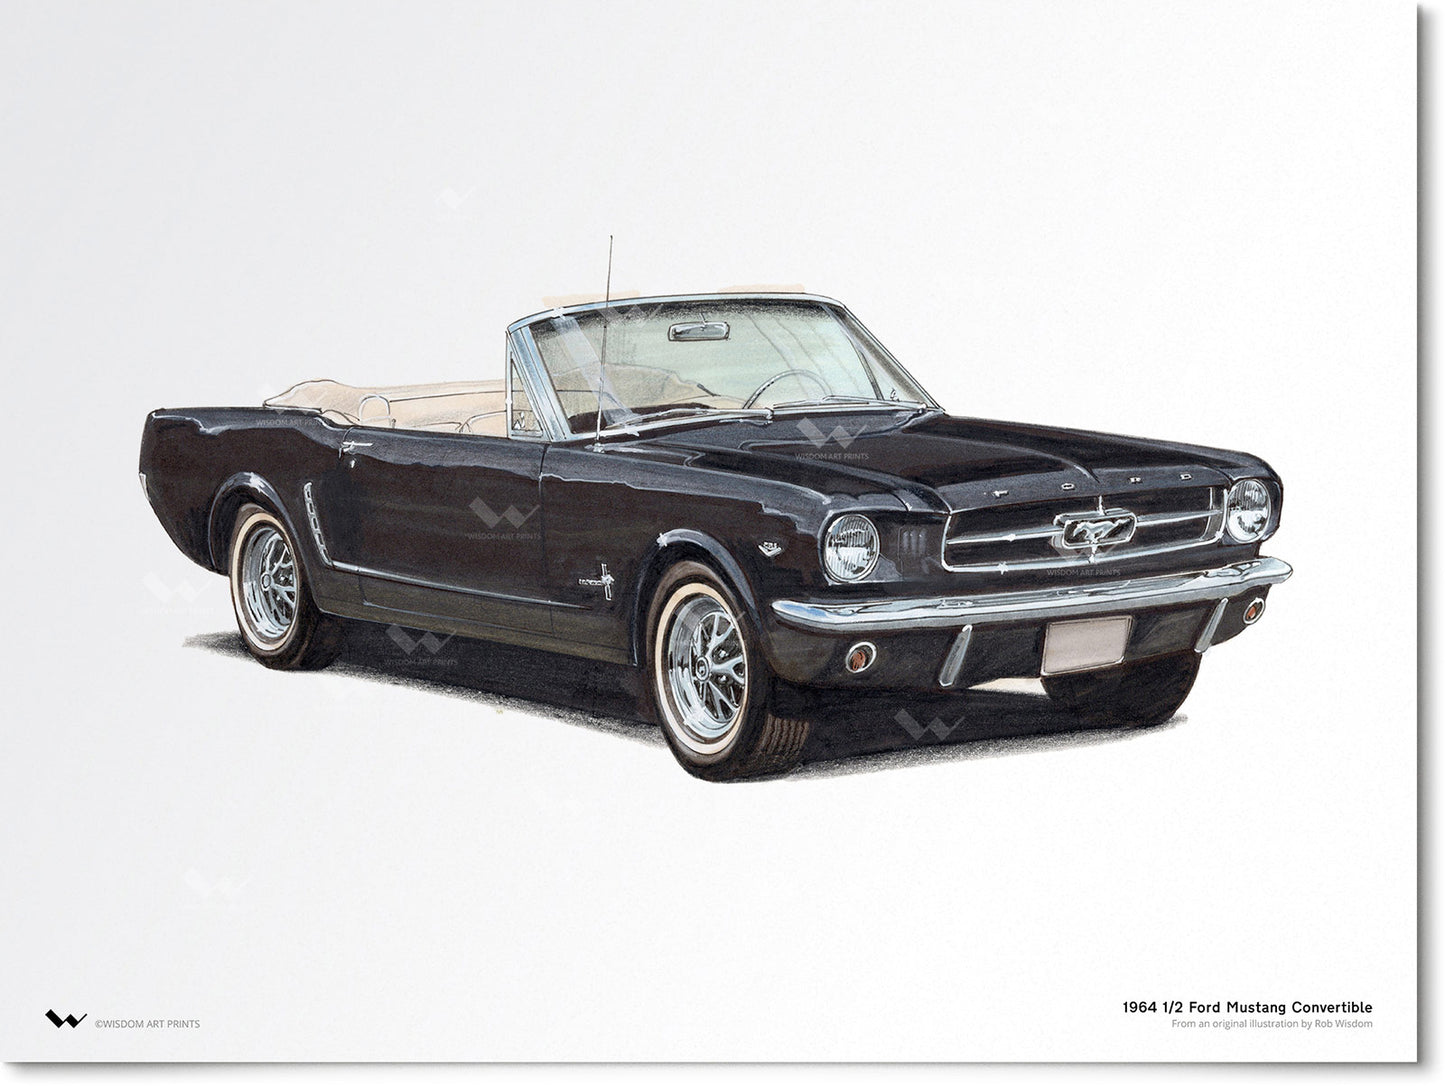 Ford Mustang 1/2 Convertible (1964)